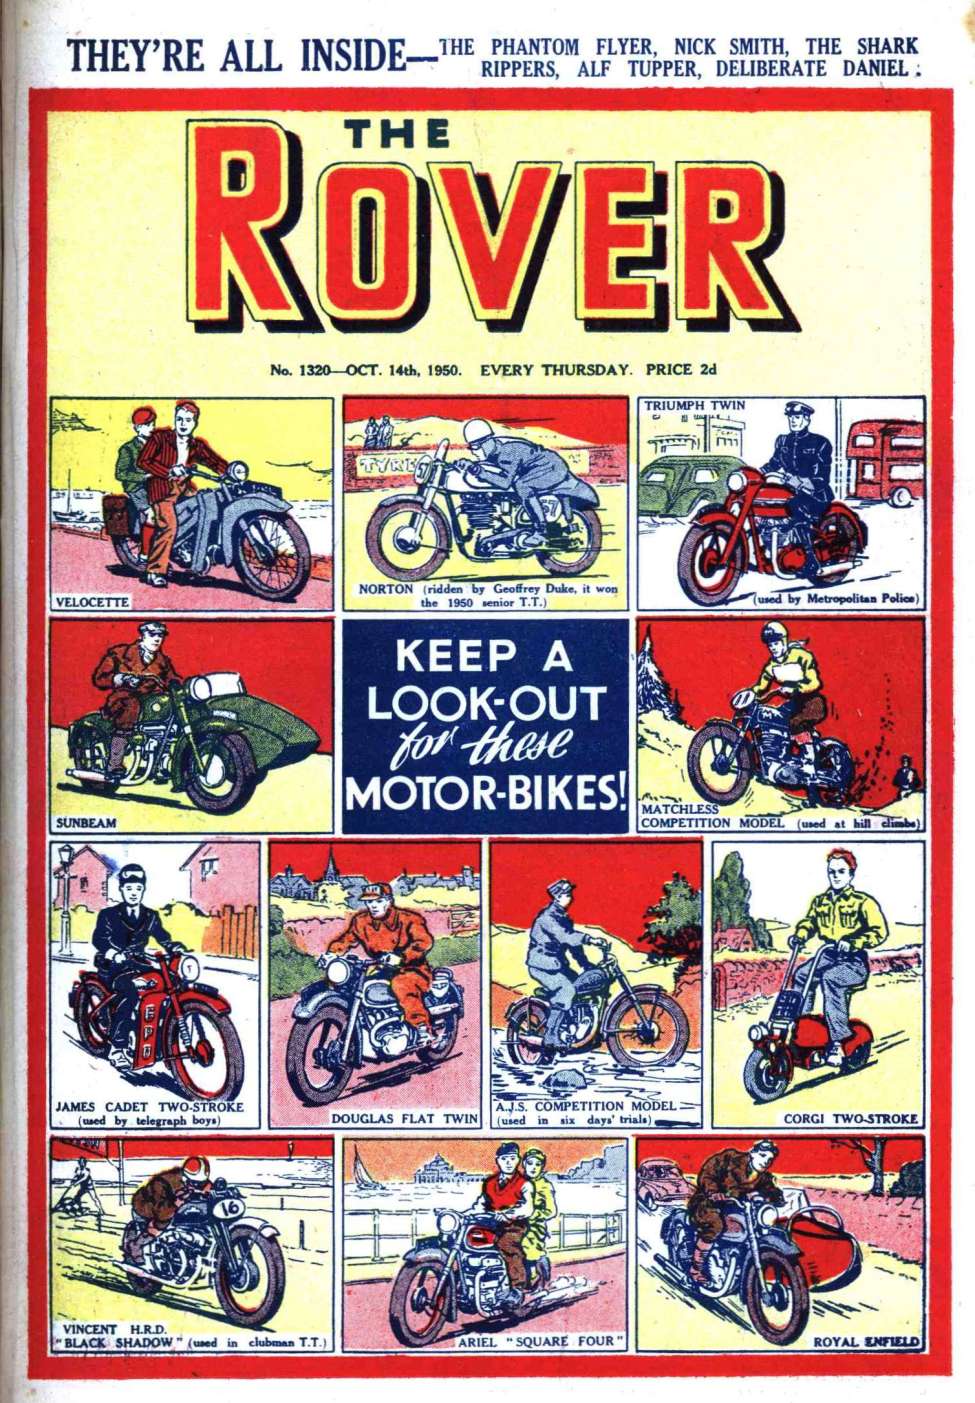 Book Cover For The Rover 1320